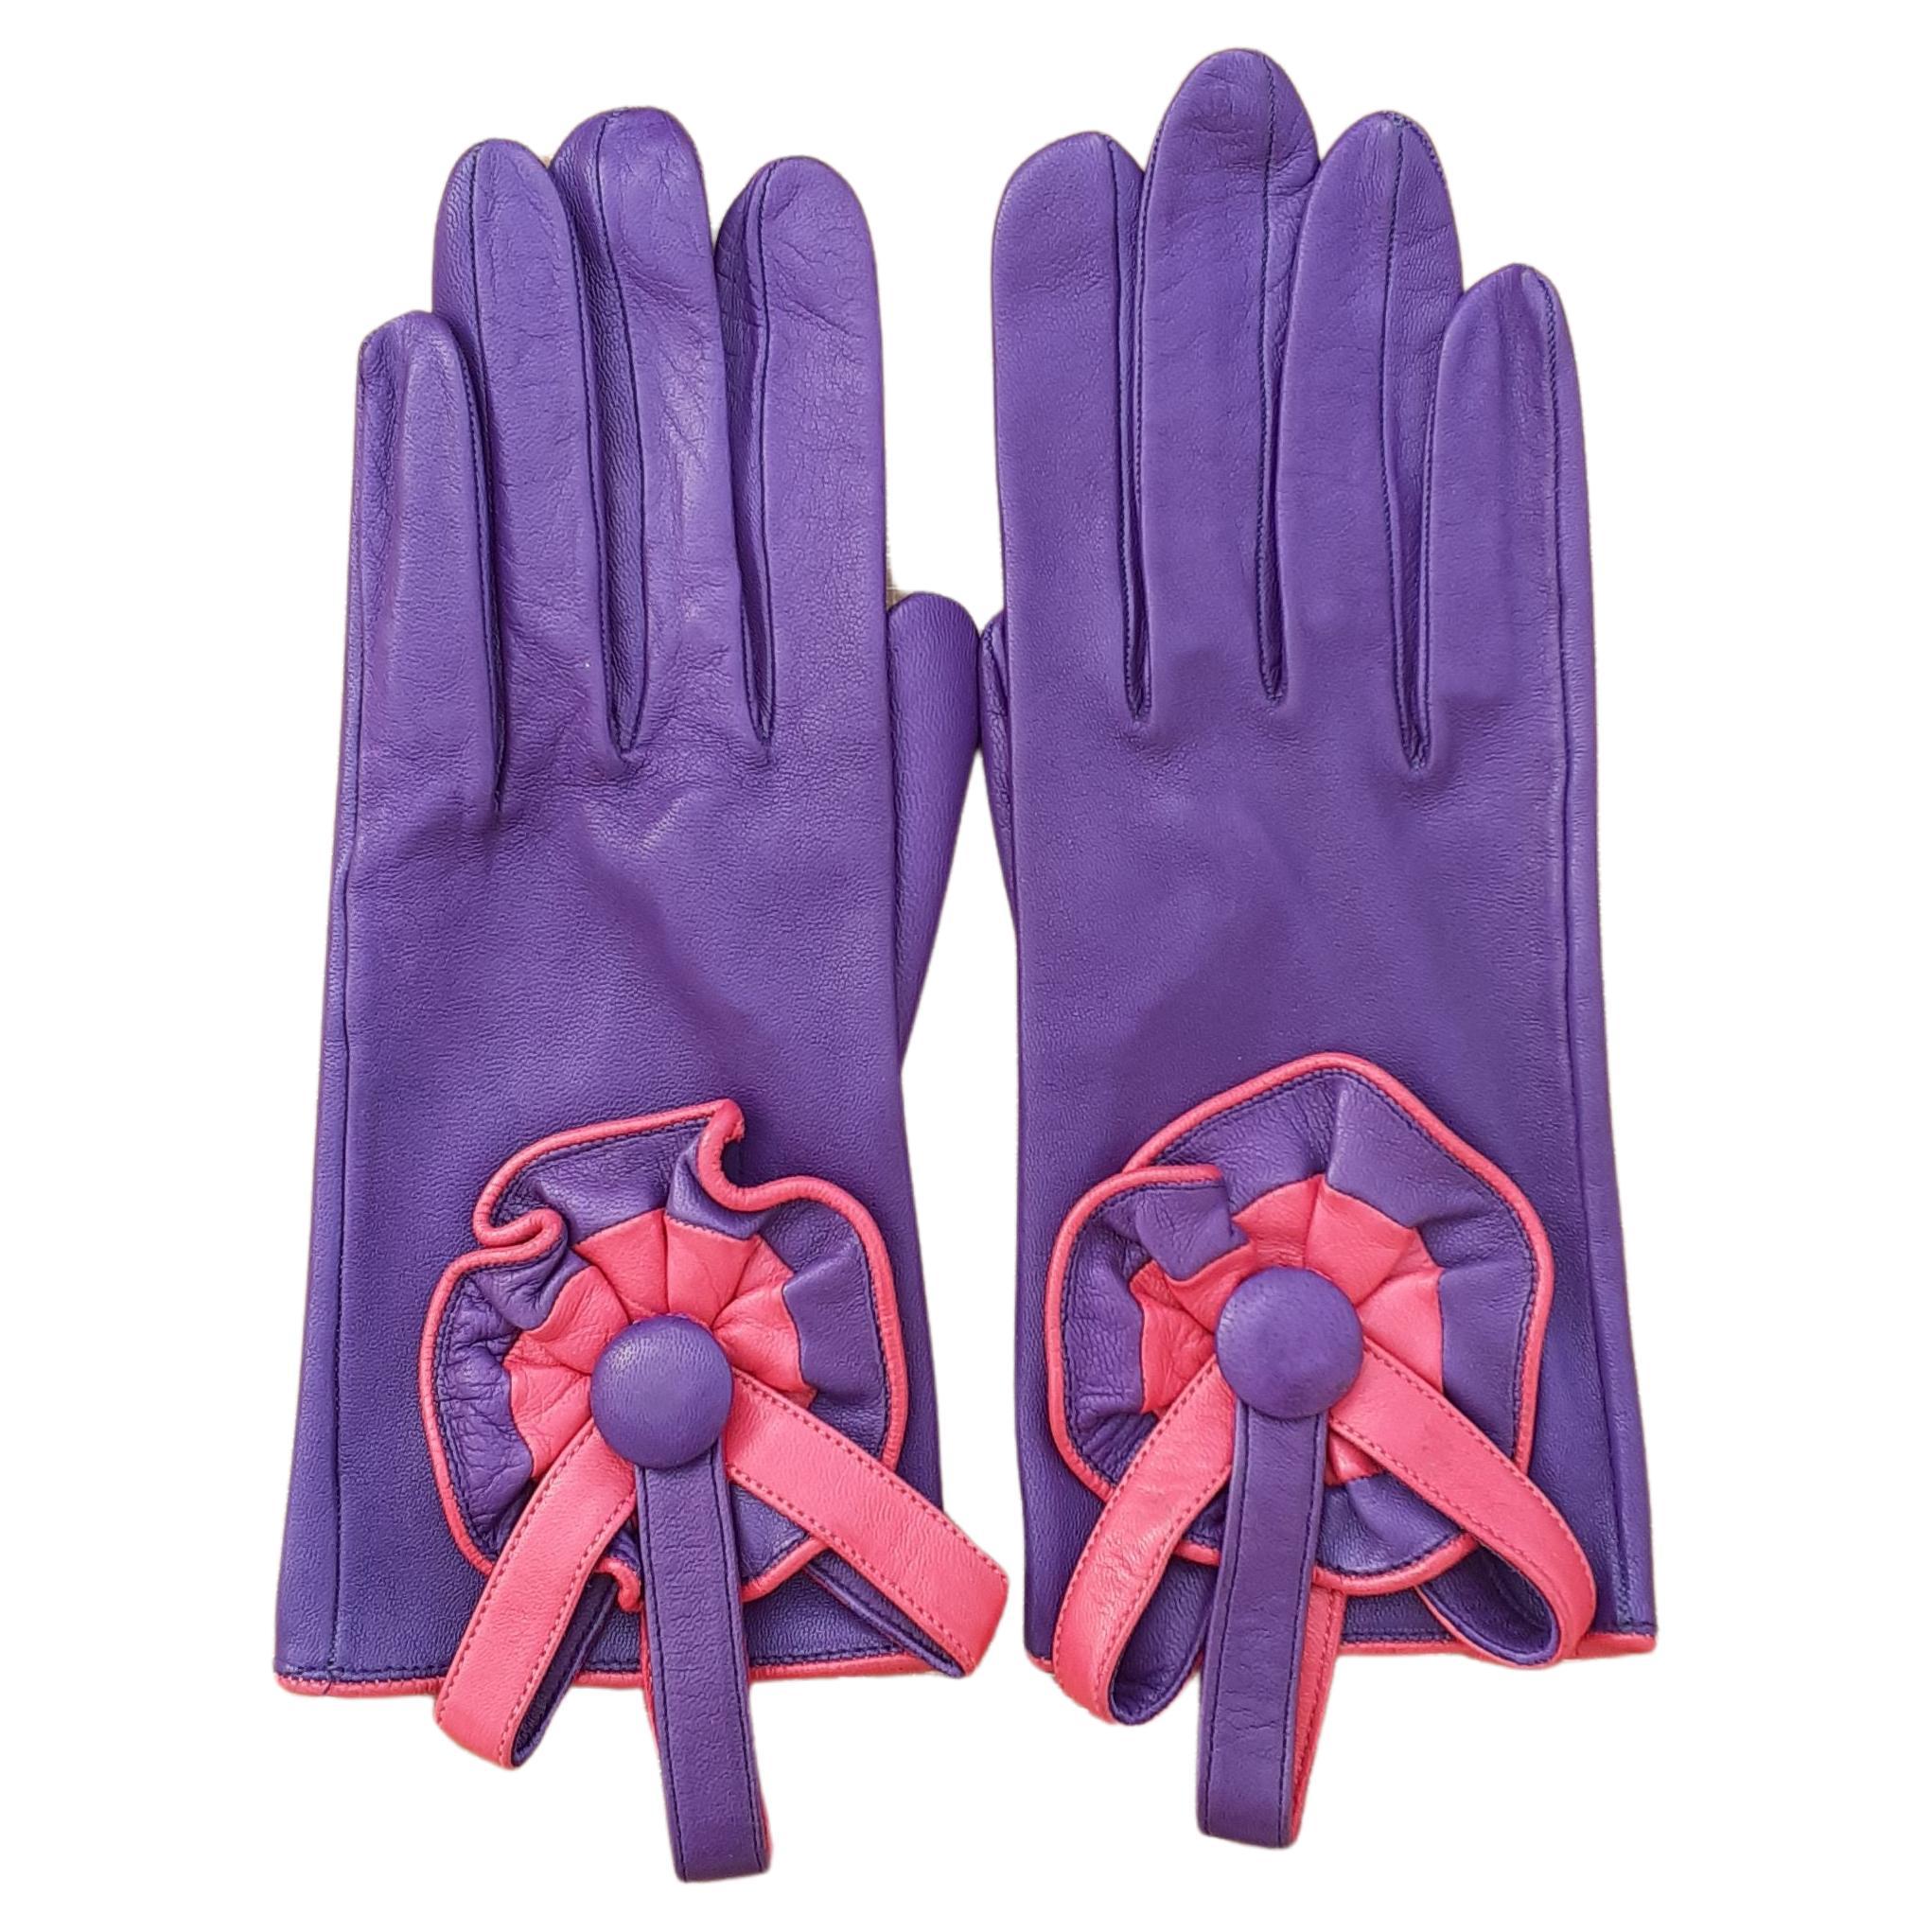 Lovely Hermès Gloves Purple Pink Leather Size 7.5 For Sale